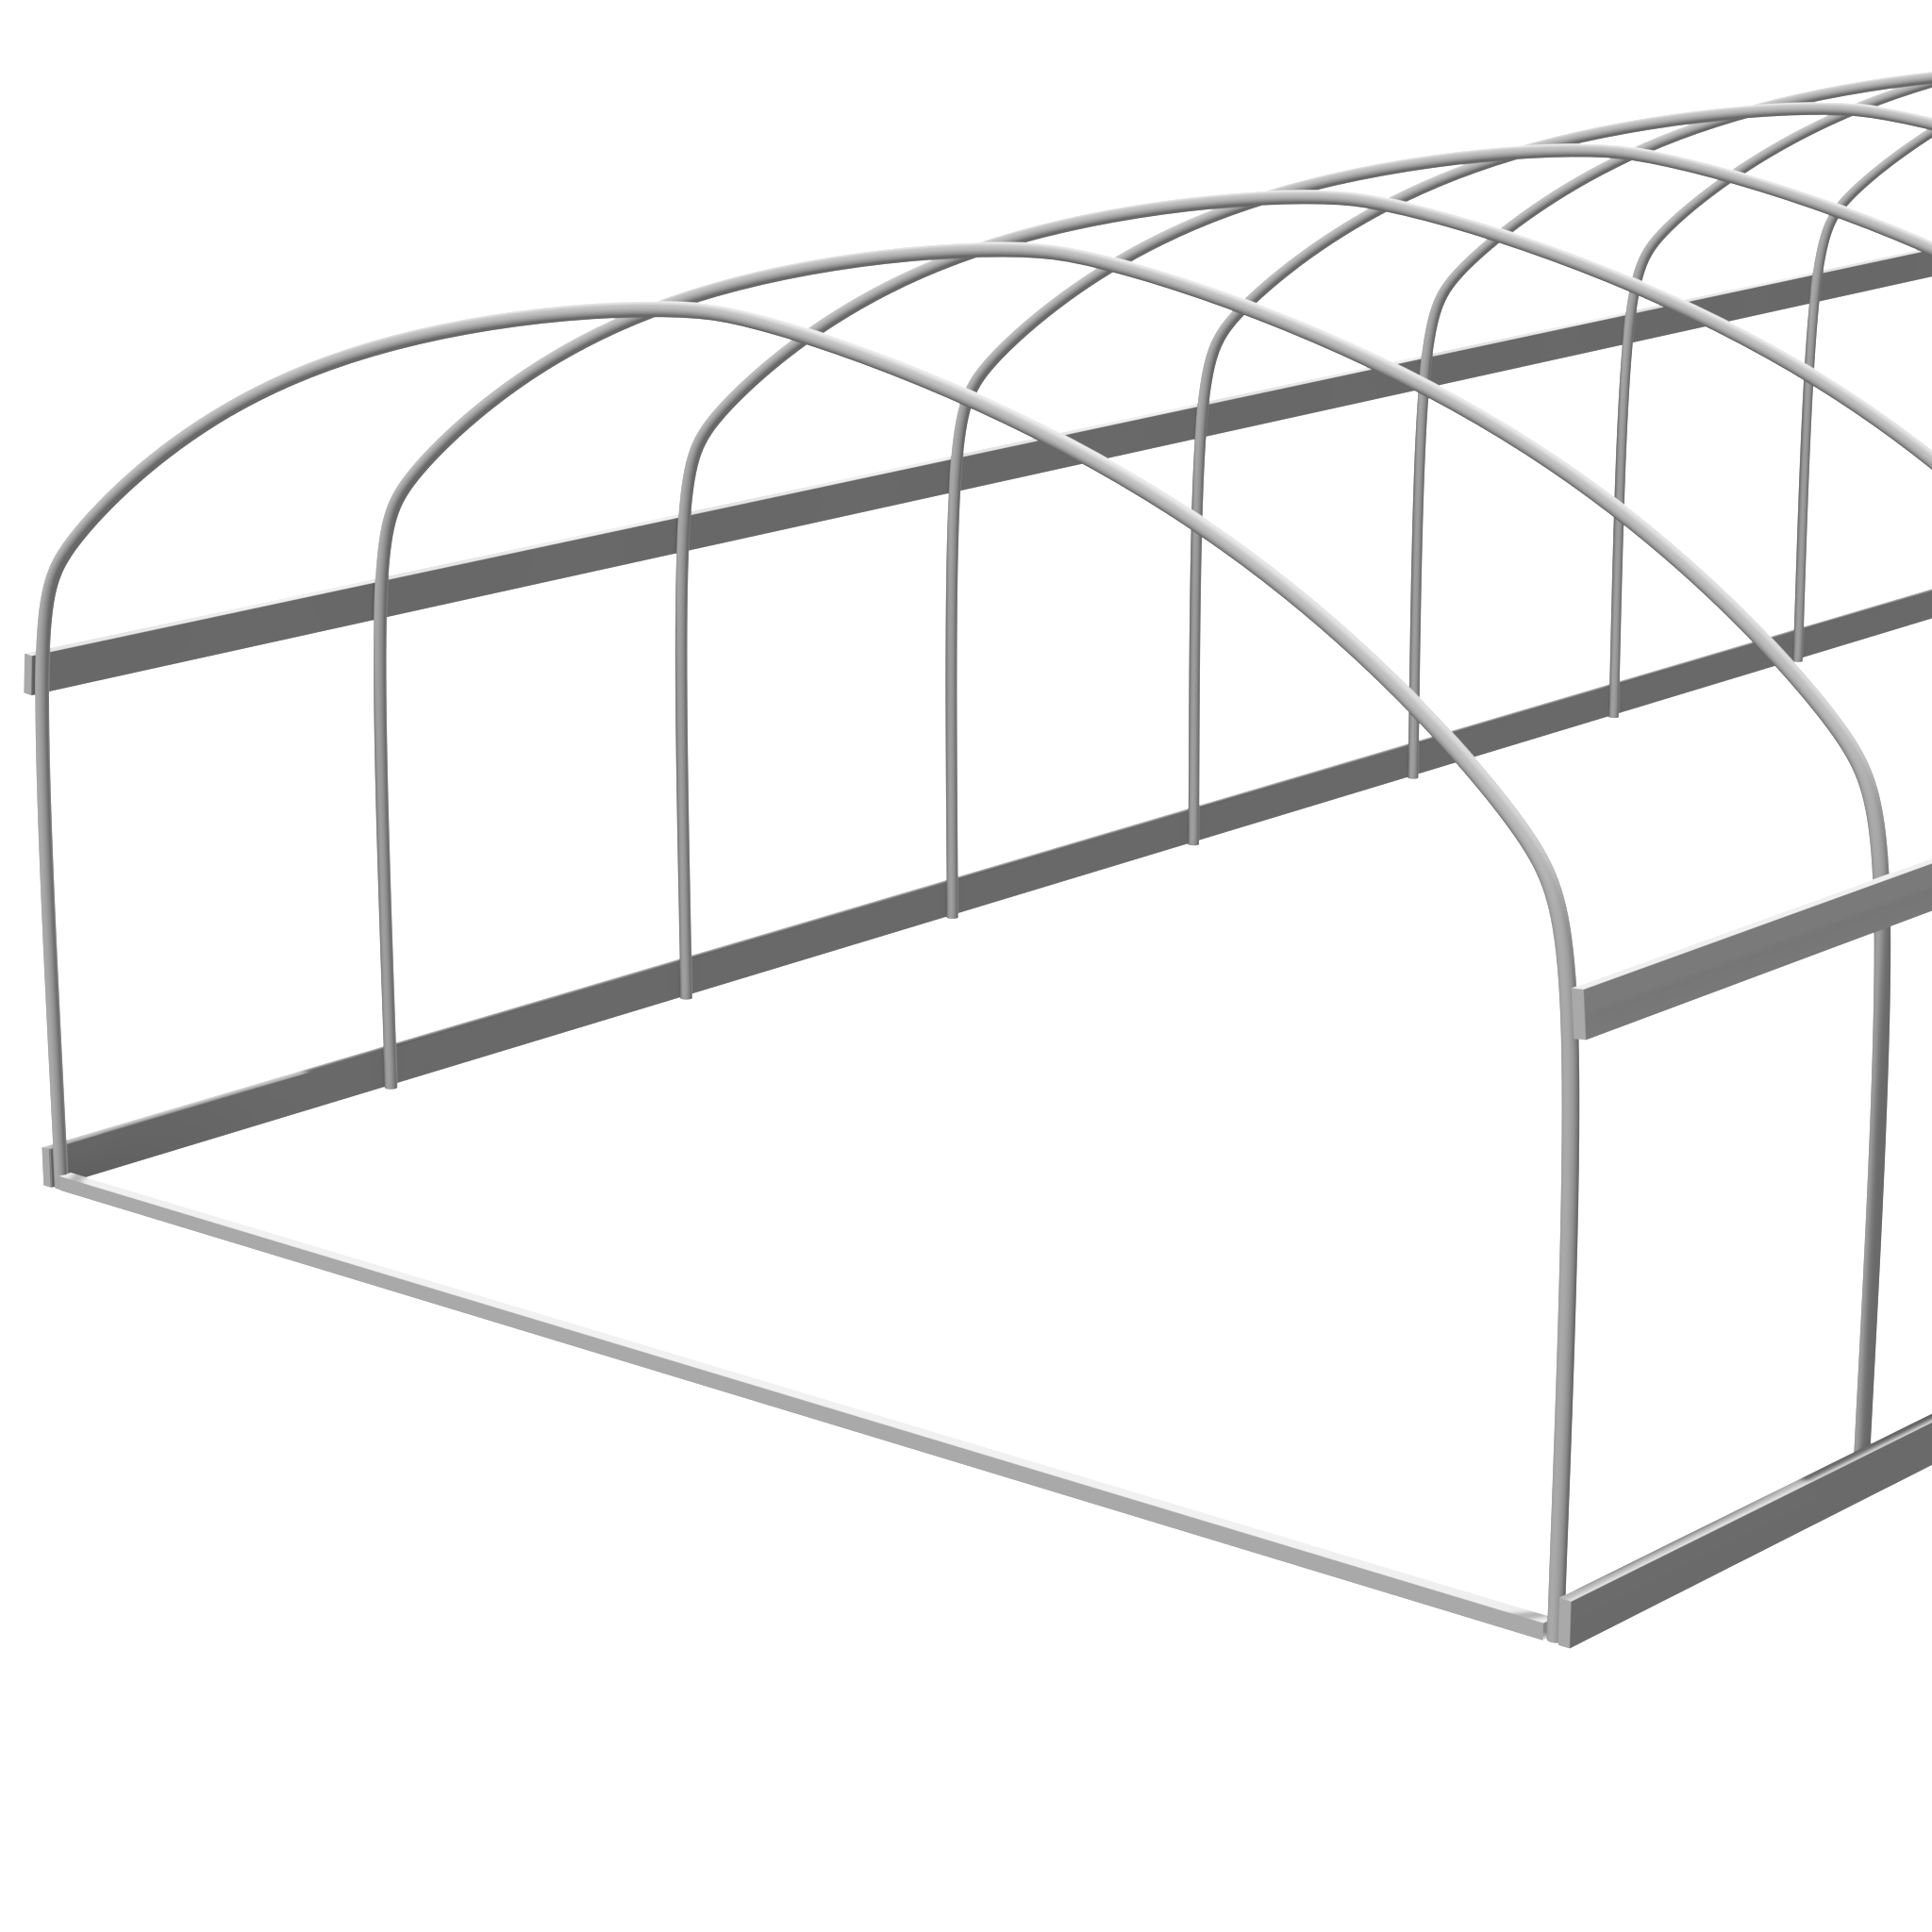 20'x20' Greenhouse Frame Quonset